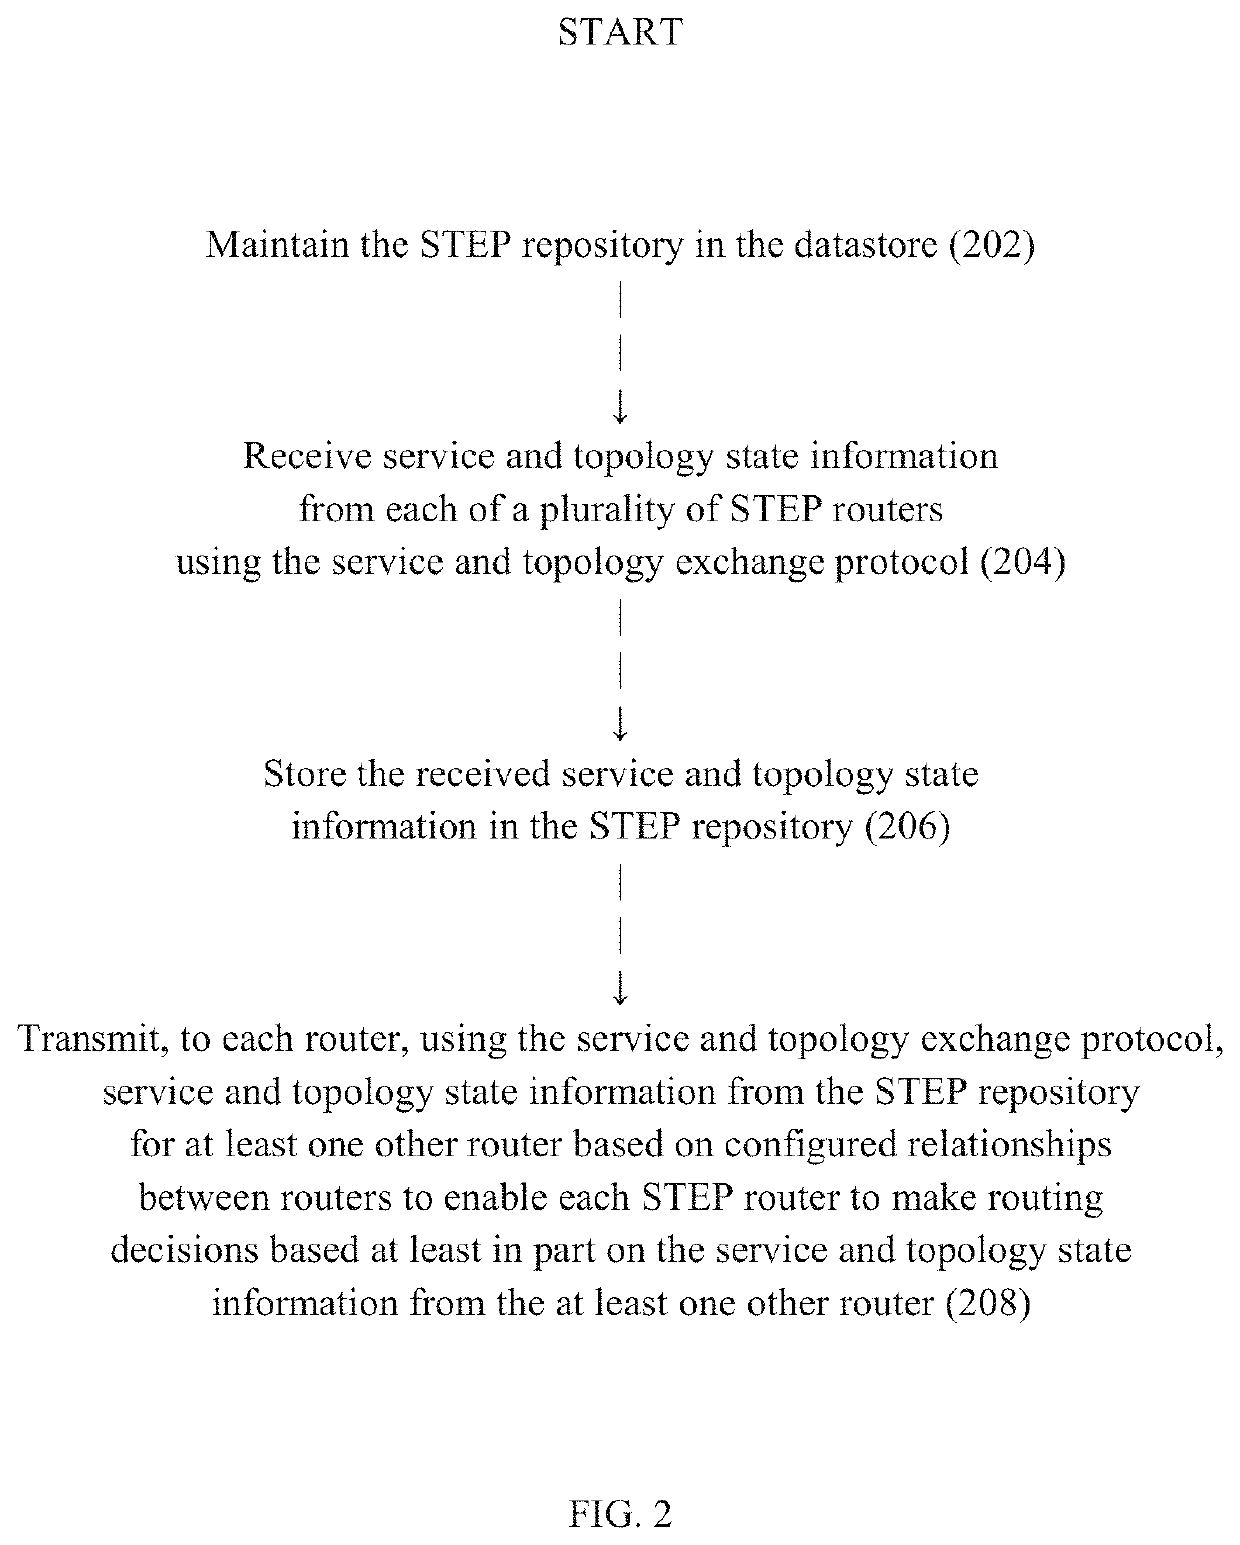 Central authority for service and topology exchange